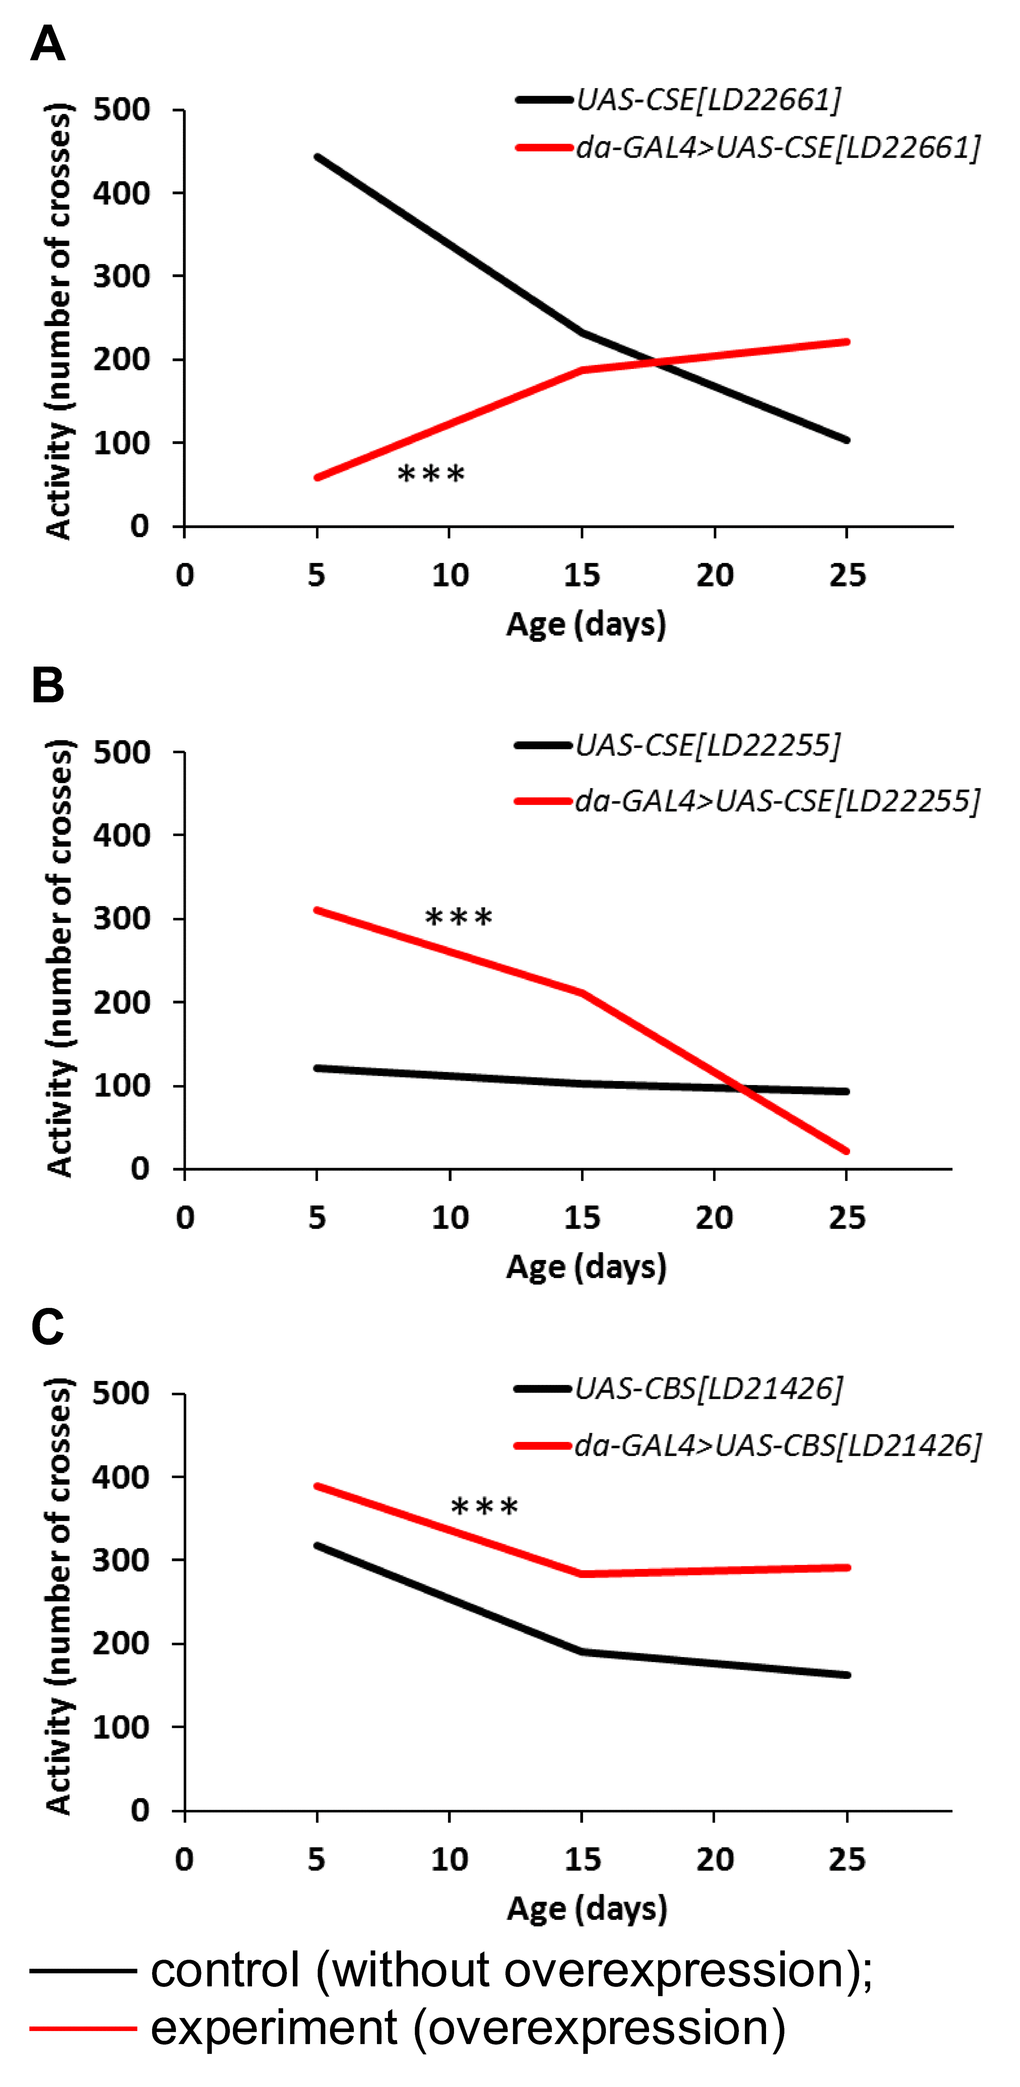 The effects of constitutive ubiquitous overexpression of CSE[LD22661] (A), CSE[LD22255] (B), CBS[LD21426] (C) on age-dependent changes in spontaneous locomotor activity. Locomotor activity was defined as averaged number of sensor crosses during 3 min by 30 flies. *р2.